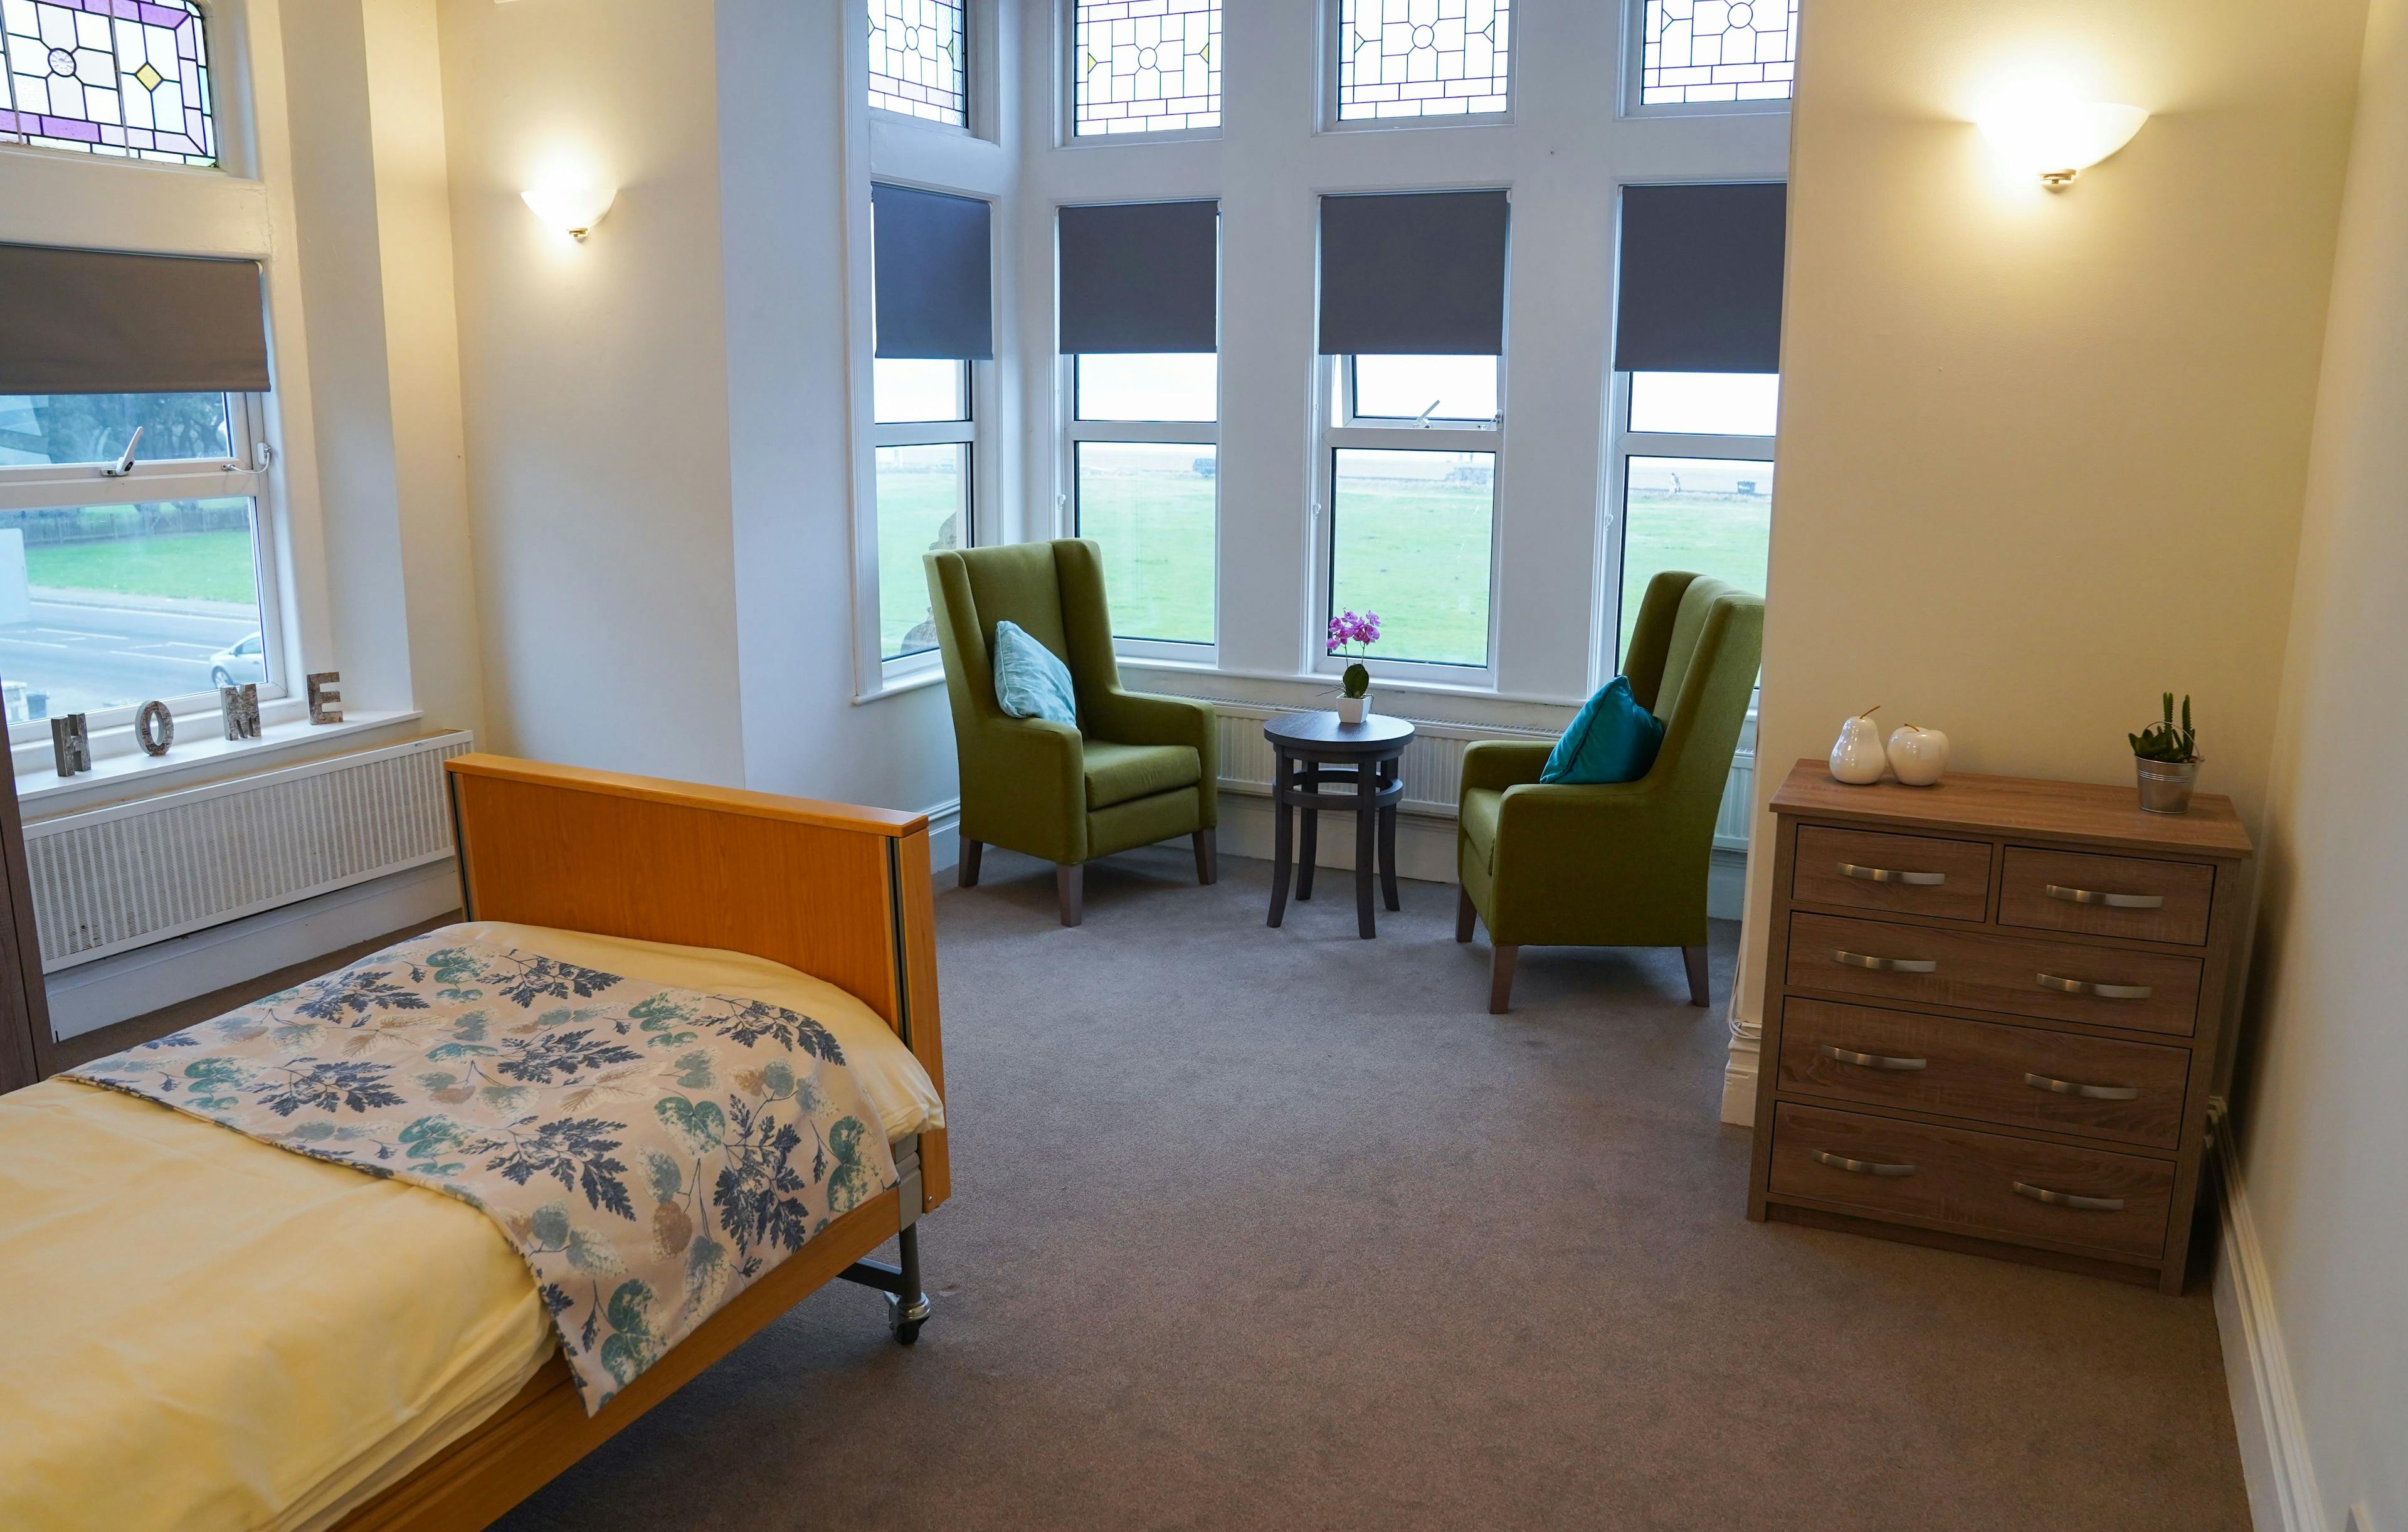 Bedroom at Beach Lawns Care Home in Somerset, South West England